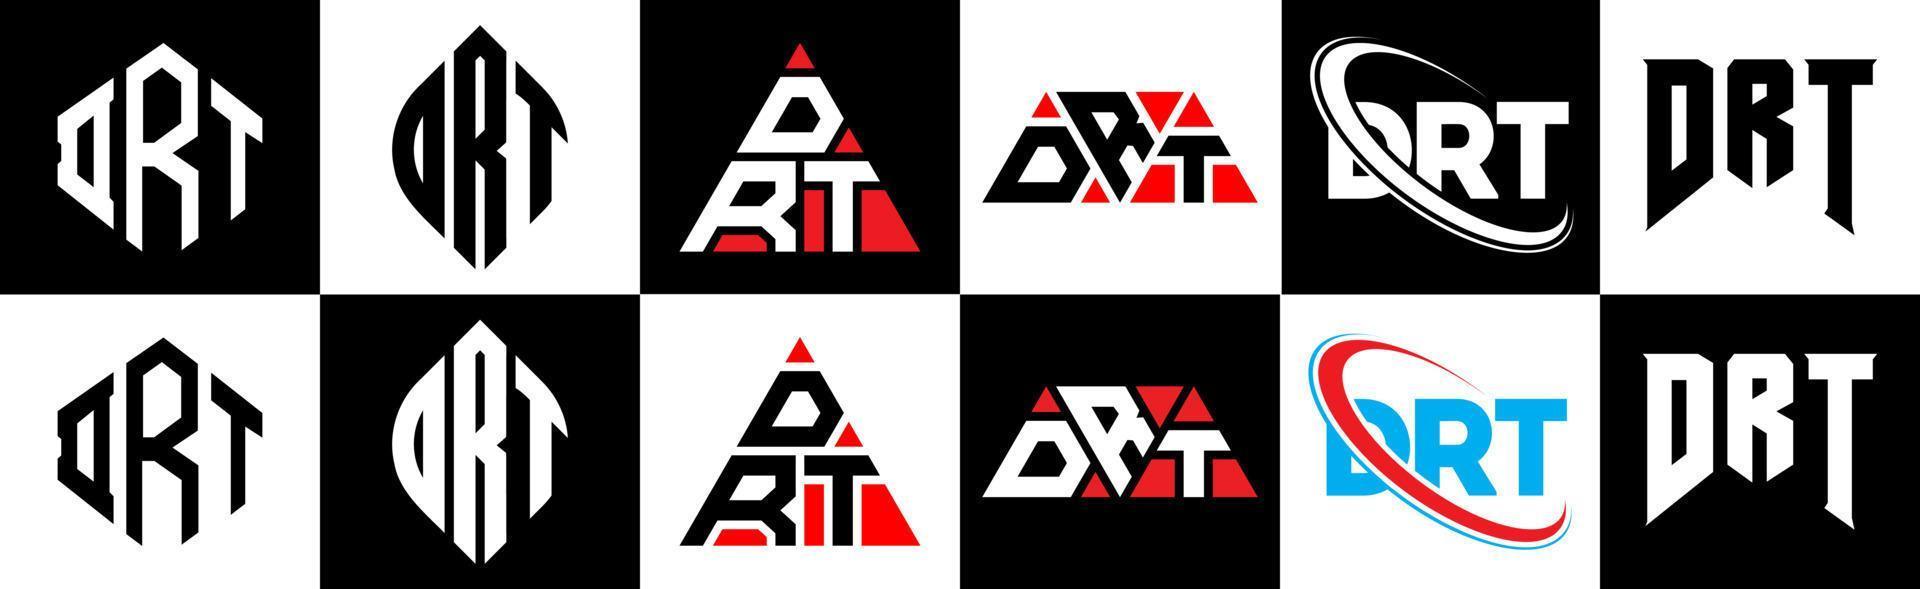 DRT letter logo design in six style. DRT polygon, circle, triangle, hexagon, flat and simple style with black and white color variation letter logo set in one artboard. DRT minimalist and classic logo vector